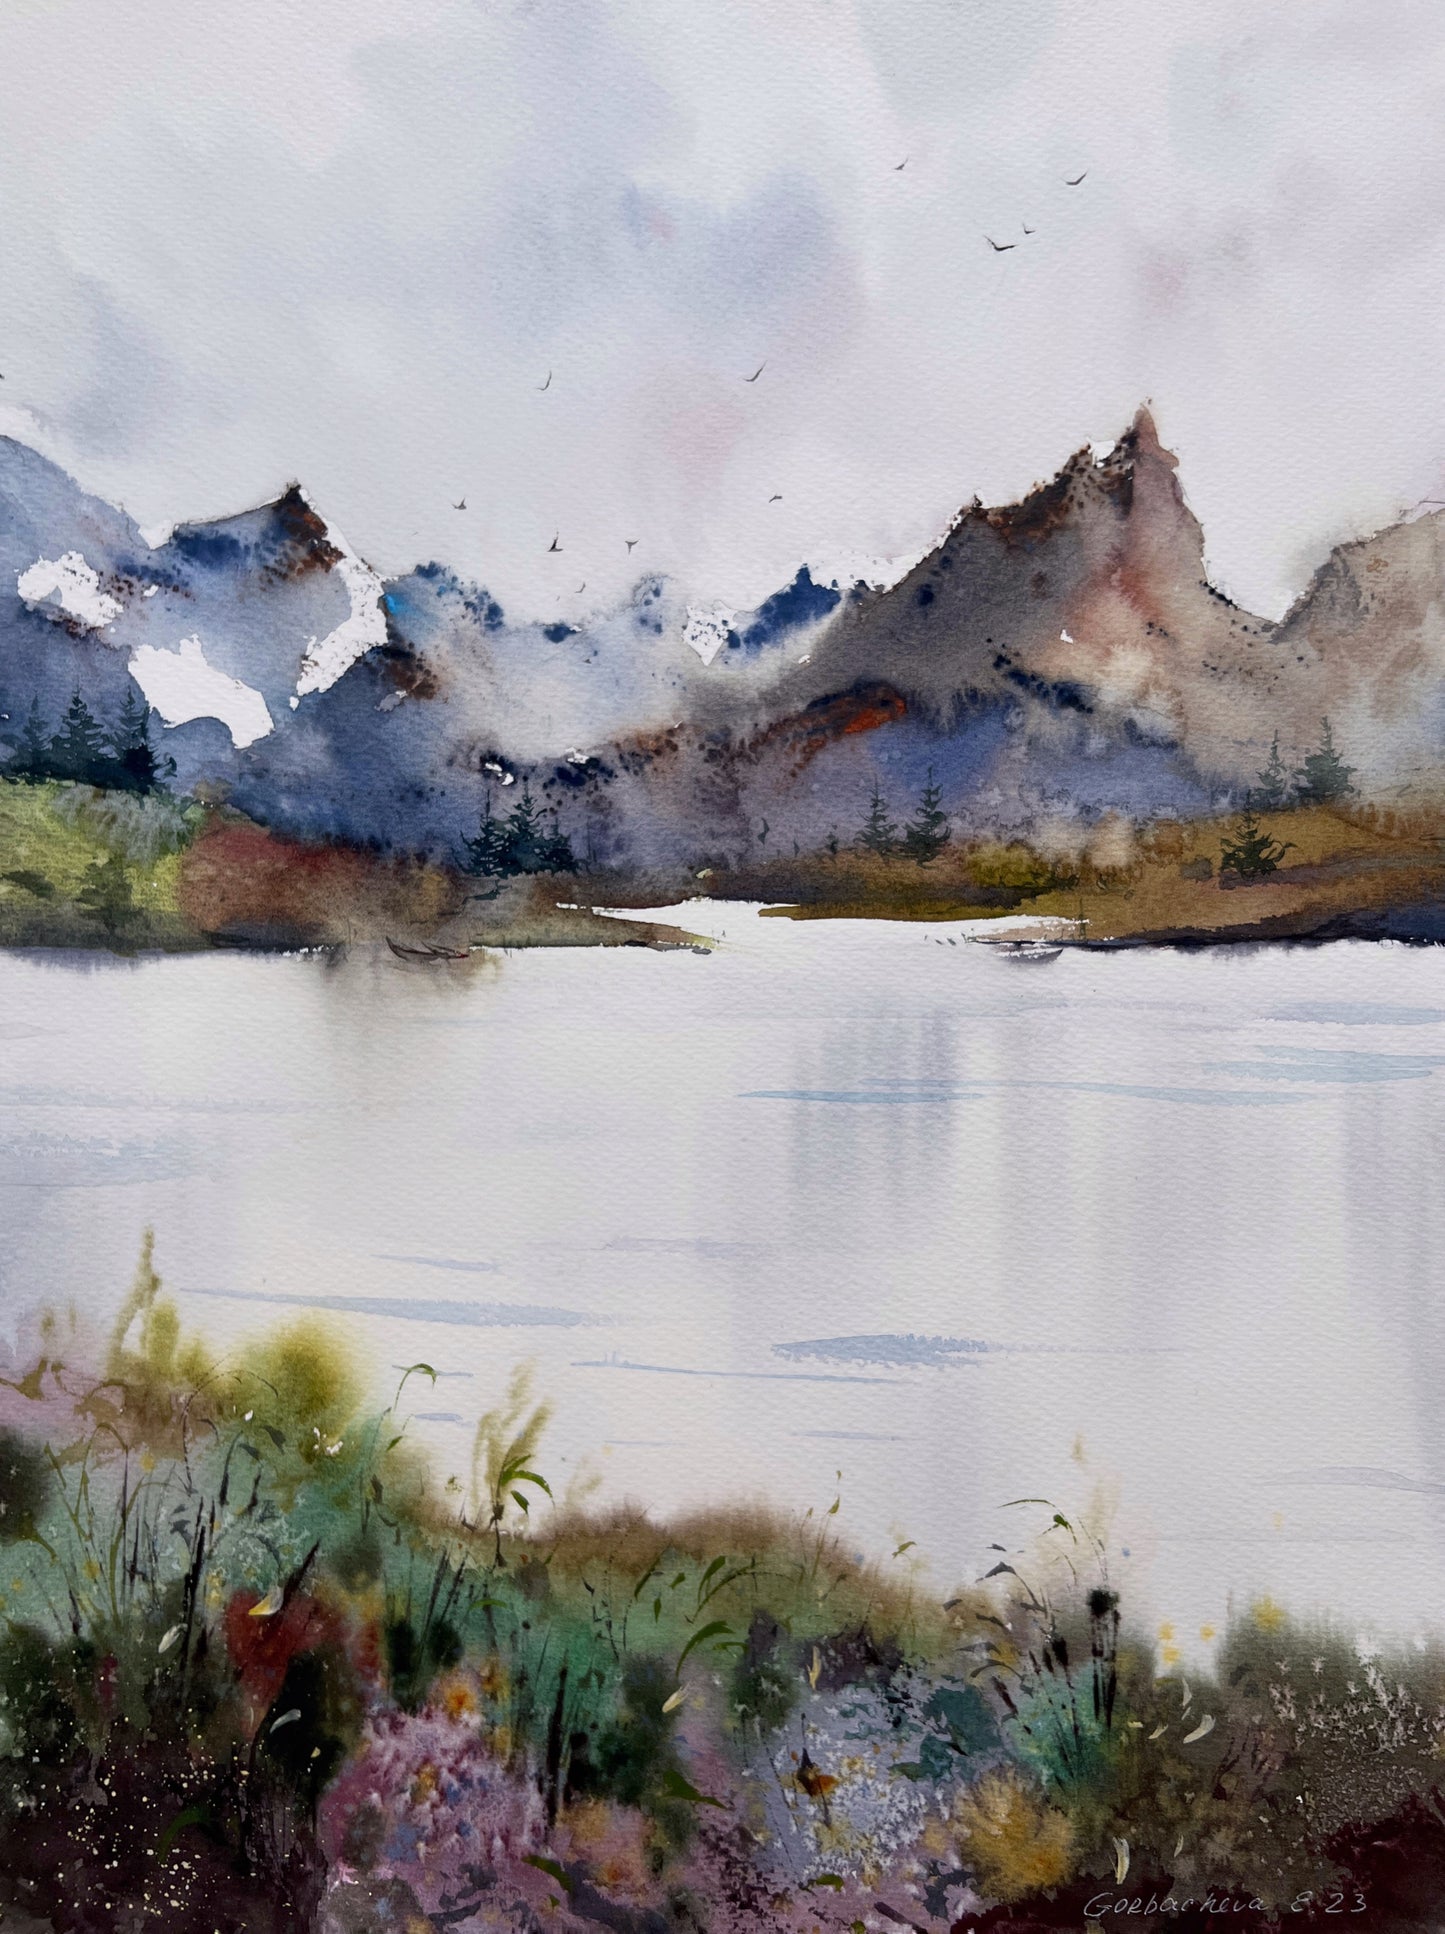 Abstract Mountain Painting Watercolour Original, Contemporary Art, Wall Decor, Modern Landscape With Lake, Wildflowers